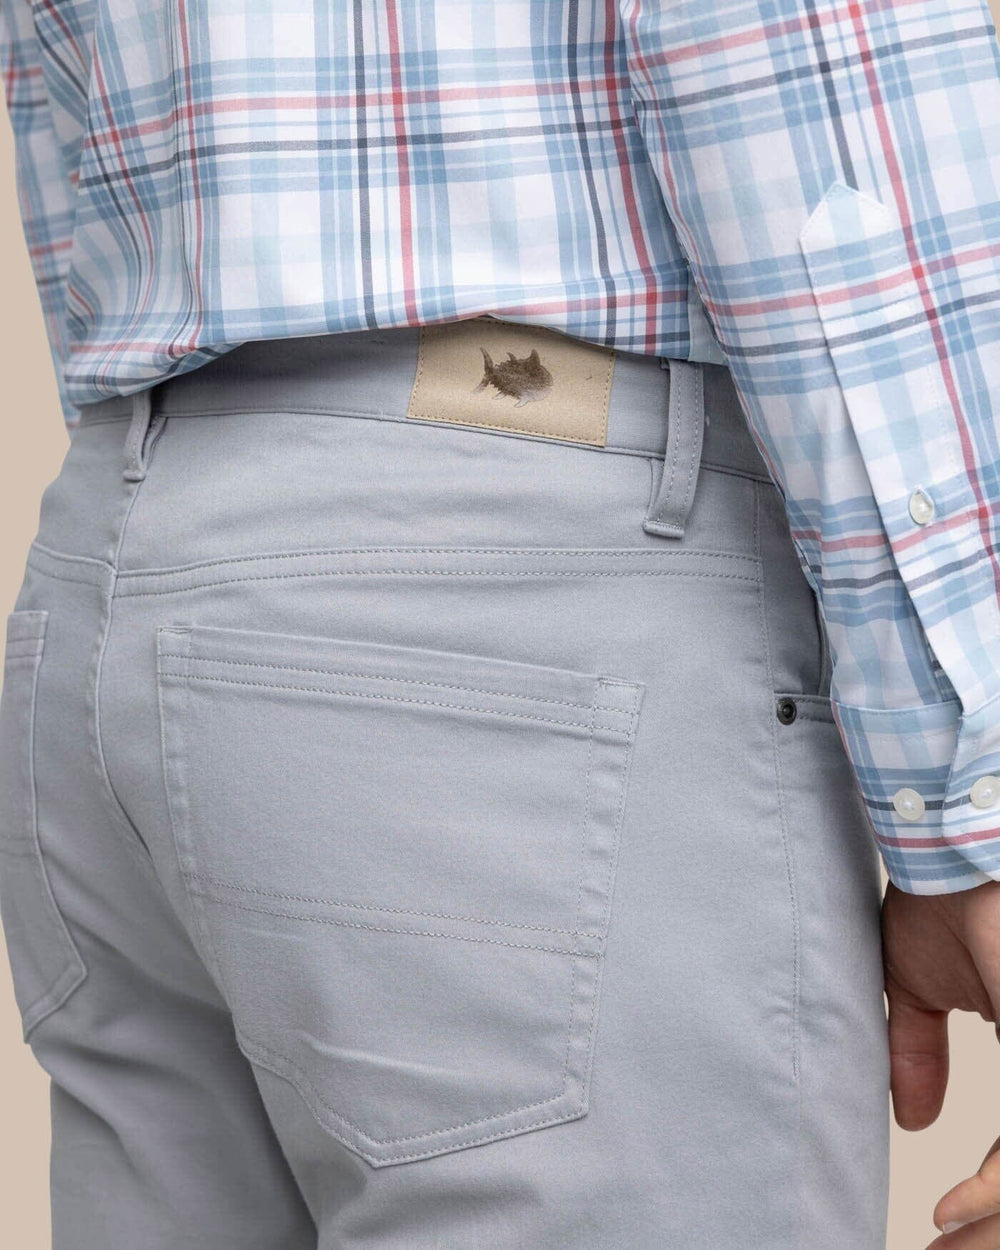 The detail view of the Southern Tide Sullivan Five Pocket Pant by Southern Tide - Ultimate Grey